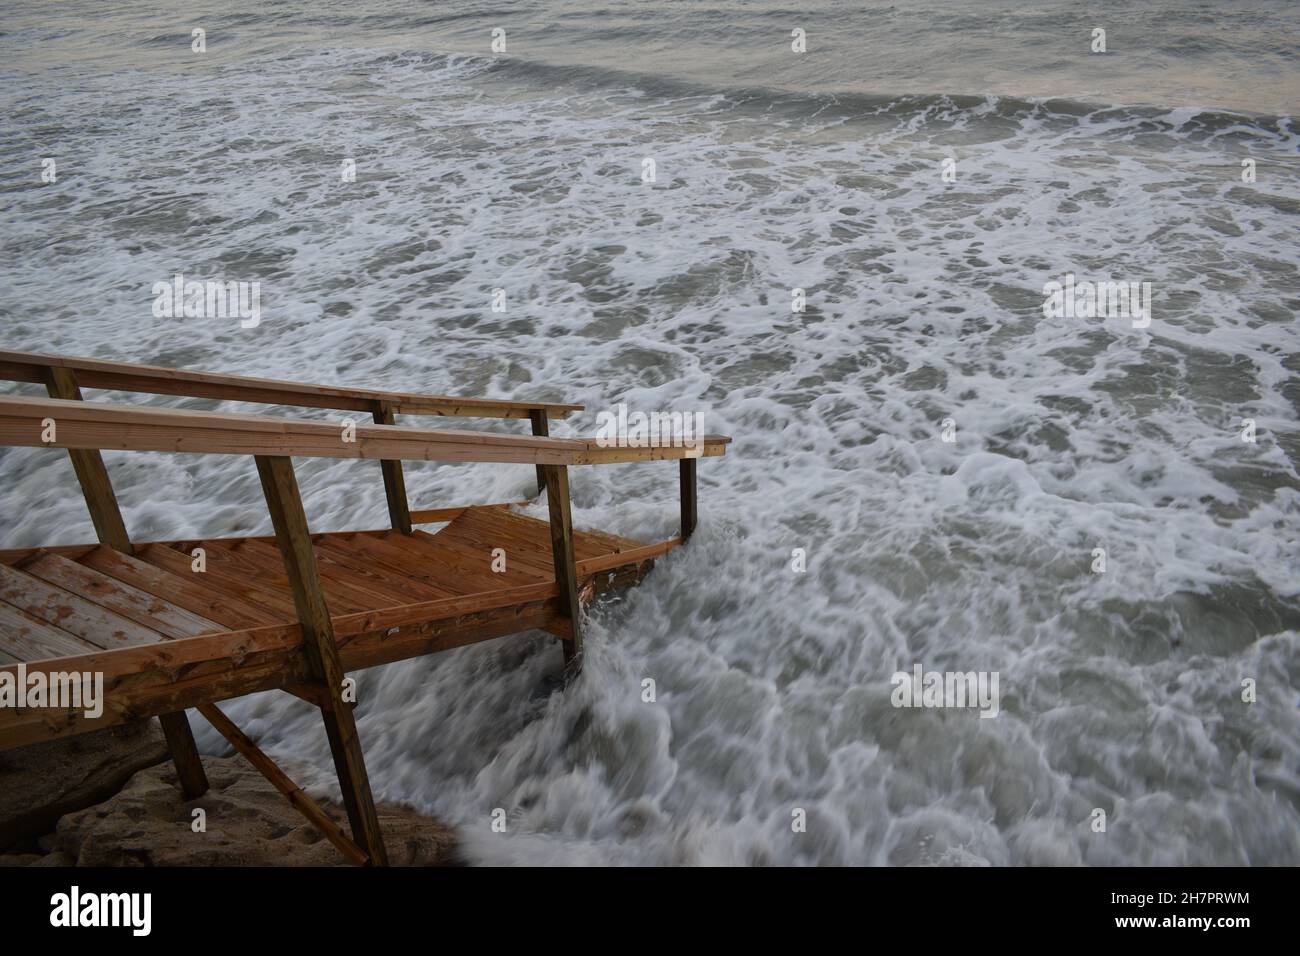 Flooding seawater damages the staircase. Stock Photo